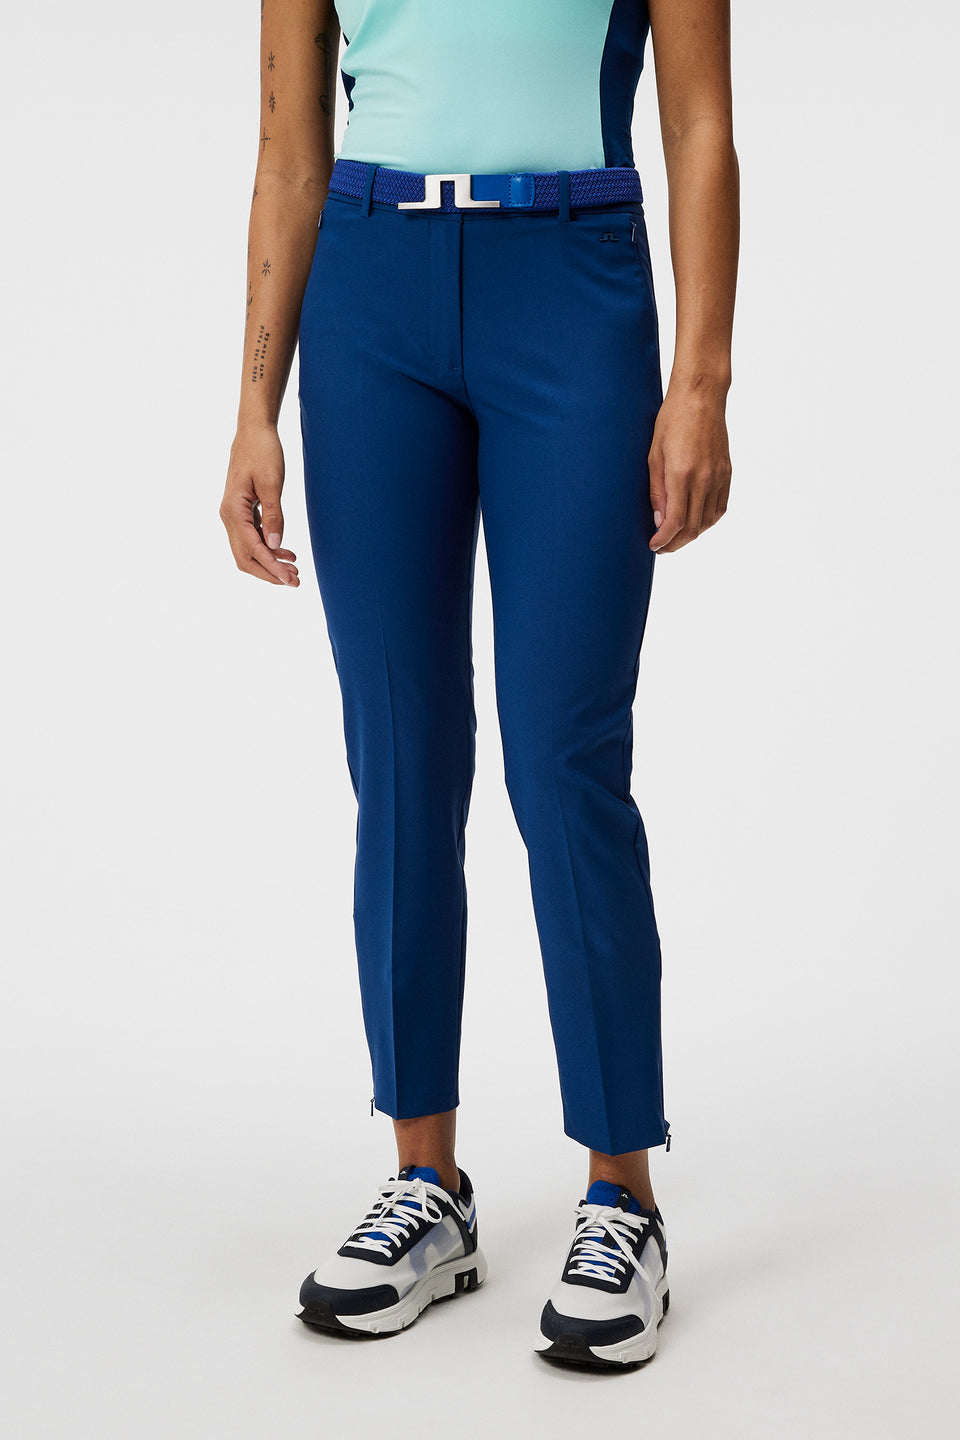 Functional Golf Trousers for Women - J.Lindeberg